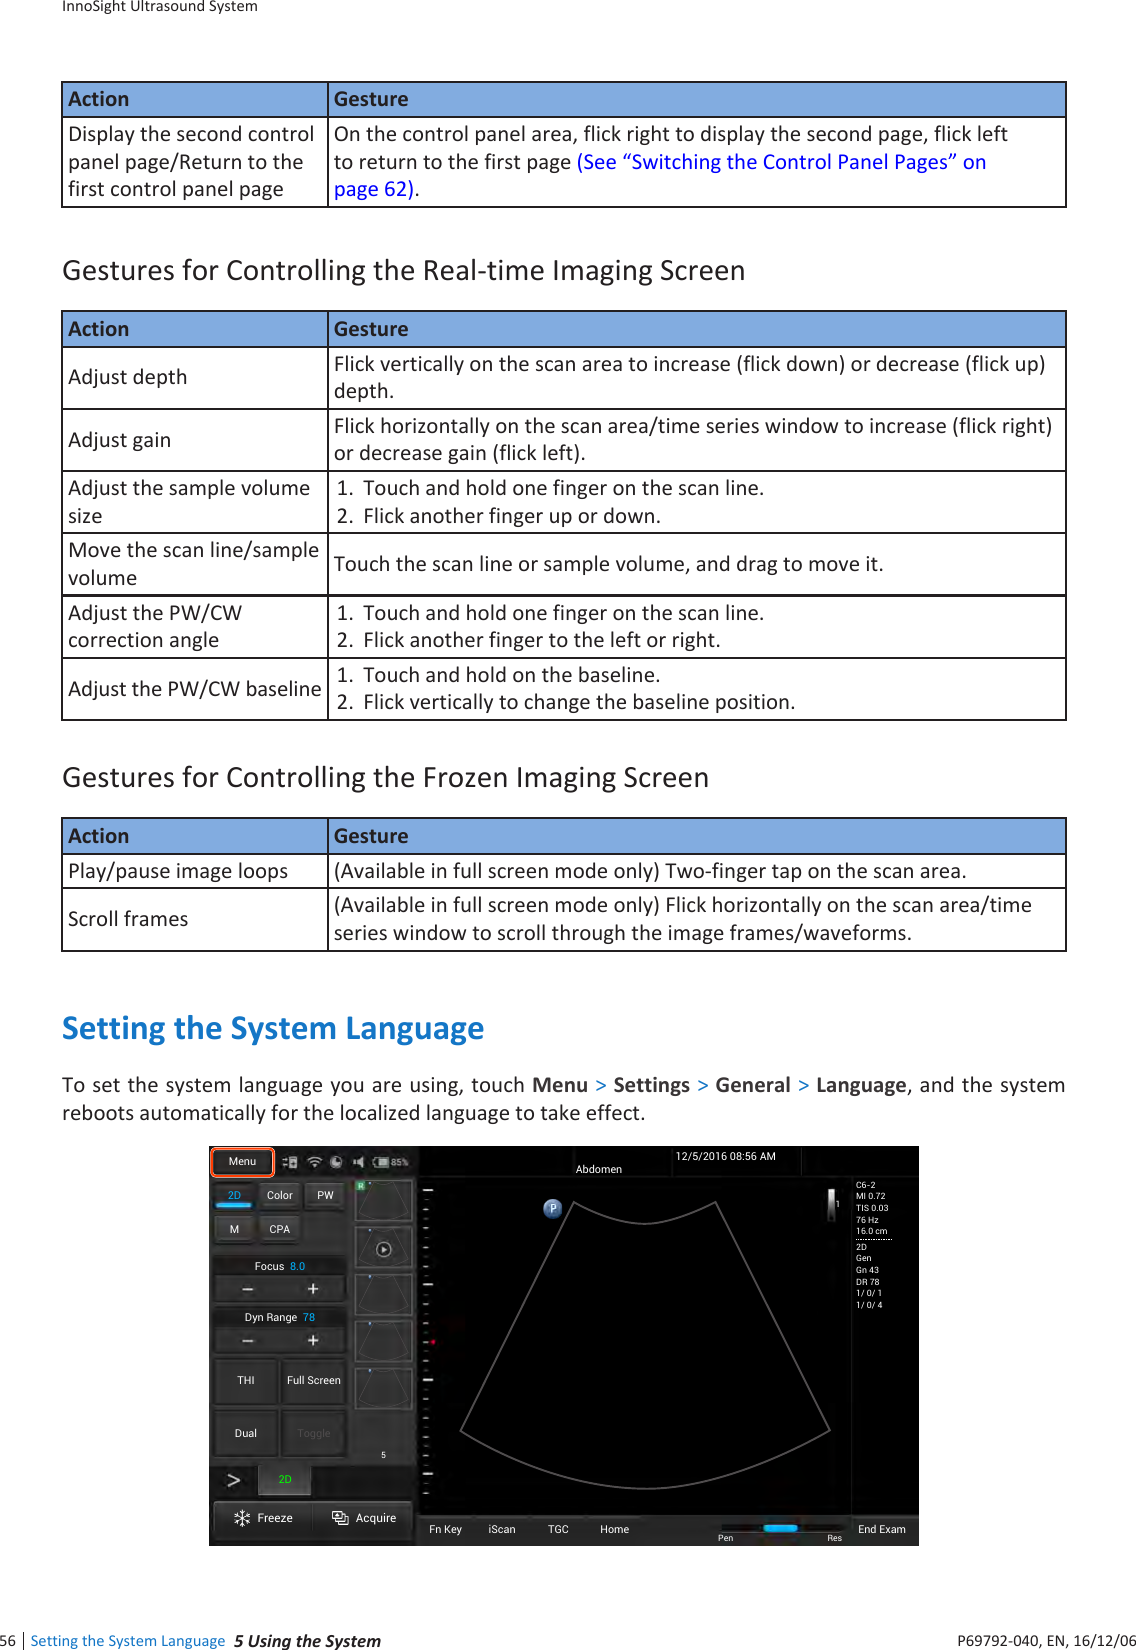 InnoSight Ultrasound SystemSetting the System Language  inee56 P6992-4, EN, 16/12/6Action GestureDisplay the second control panel page/Return to the first control panel pageOn the control panel area, flick right to display the second page, flick left to return to the first page (See Switching the Control Panel Pages on page 62)Gestures for Controlling the Real-time Imaging ScreenAction GestureAdjust depth Flick vertically on the scan area to increase (flick down) or decrease (flick up) depth Adjust gain Flick horizontally on the scan area/time series window to increase (flick right) or decrease gain (flick left)Adjust the sample volume size1  Touch and hold one finger on the scan line2  Flick another finger up or downMove the scan line/sample volume Touch the scan line or sample volume, and drag to move itAdjust the PW/CW correction angle1  Touch and hold one finger on the scan line2  Flick another finger to the left or rightAdjust the PW/CW baseline 1  Touch and hold on the baseline 2  Flick vertically to change the baseline positionGestures for Controlling the Frozen Imaging ScreenAction GesturePlay/pause image loops (Available in full screen mode only) Two-finger tap on the scan areaScroll frames (Available in full screen mode only) Flick horizontally on the scan area/time series window to scroll through the image frames/waveformsSetting the System LanguageTo set the system language you are using, touch Menu &gt; Settings &gt; General &gt; Language, and the system reboots automatically for the localized language to take effect2D Color PWM CPAFocus8.0Dyn Range78THI Full ScreenDual ToggleFreeze AcquireFn Key iScan TGC Home2DMenuEnd ExamPen ResAbdomen12/5/2016 08:56 AMC6-2MI 0.72TIS 0.0376 Hz16.0 cm2DGenGn 43DR 781/ 0/ 11/ 0/ 415